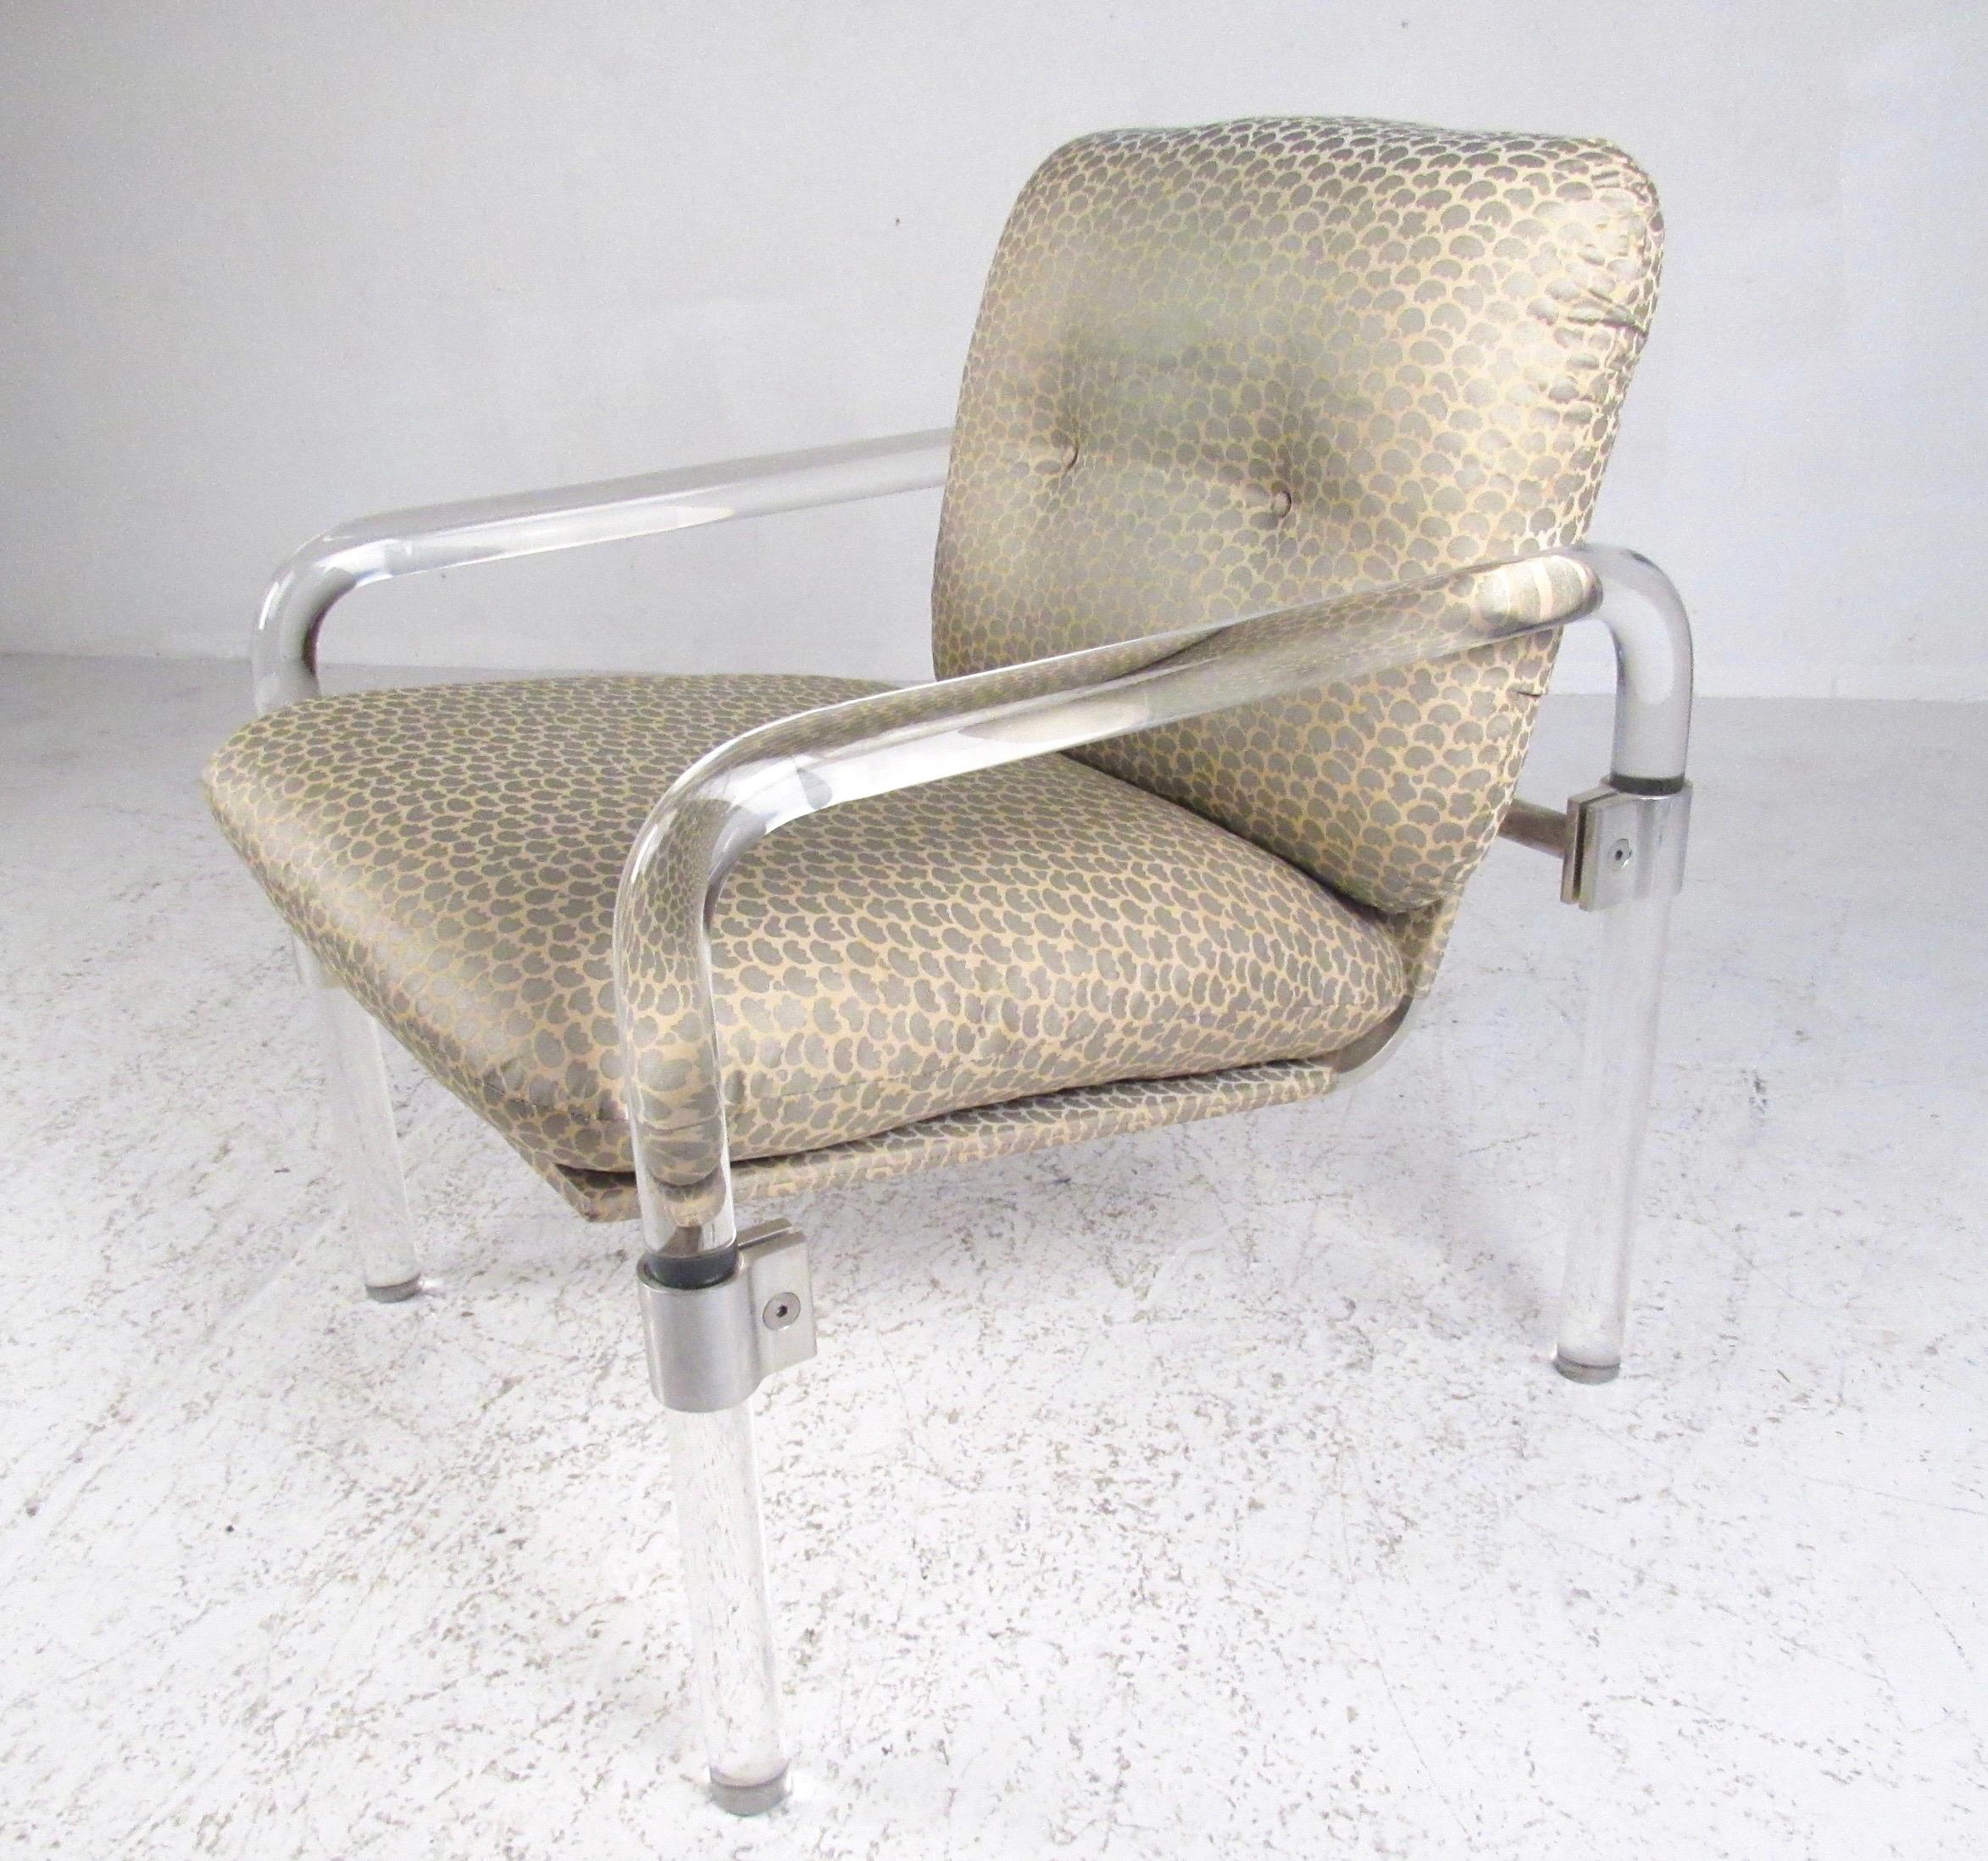 This striking designer made lounge chair features shapely Lucite frame with steel hardware complimented by beautiful vintage fabric. Signed by the designer Jeff Messerschmidt, 1977. Part of his 